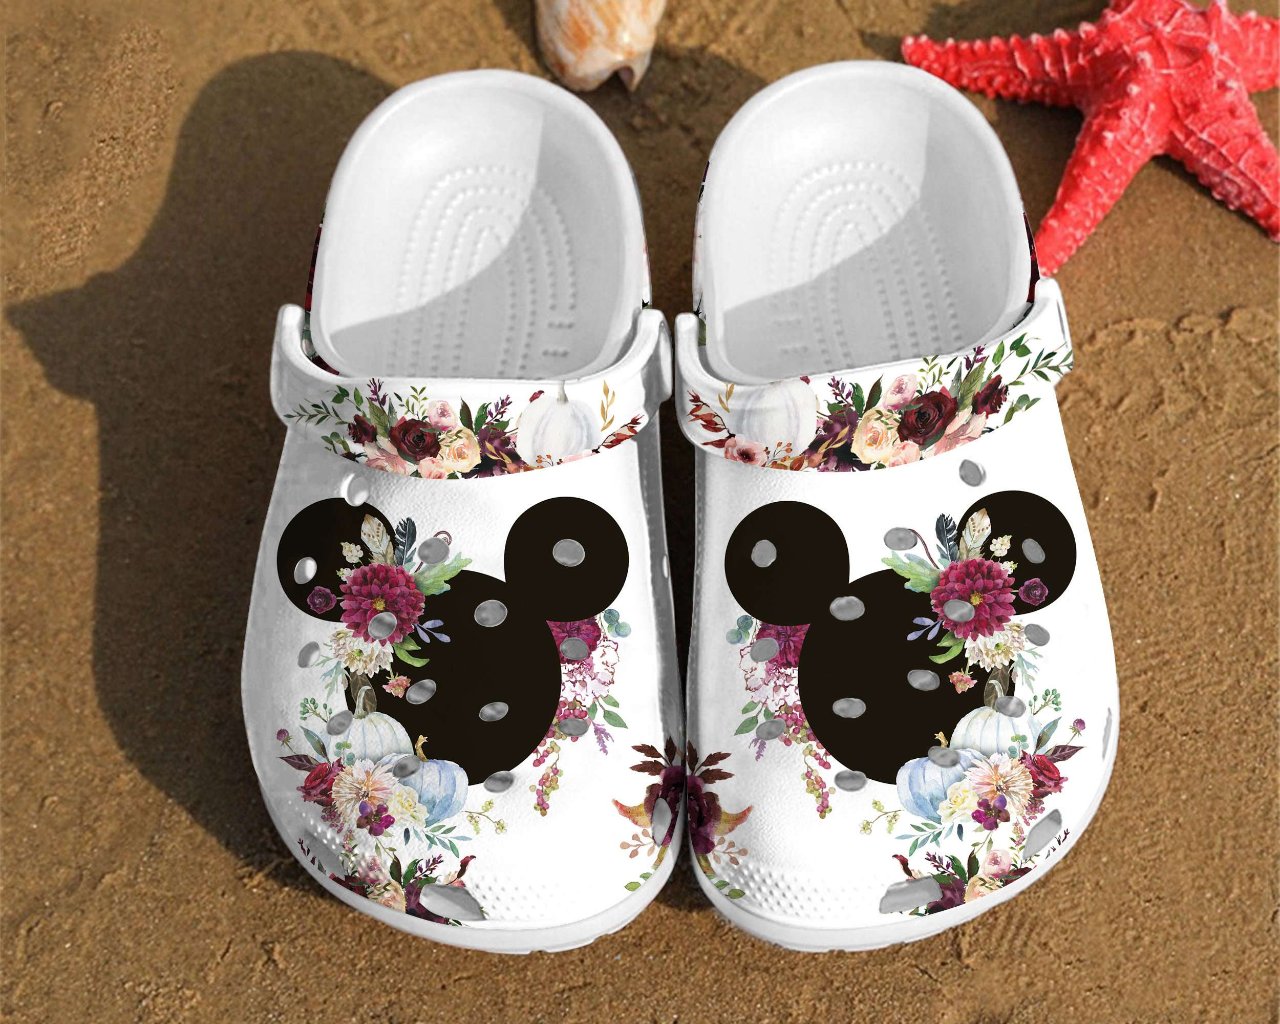 Disney Clogs Disney Art Clogs Anniversary Gifts. Mickey Minnie Clogs Mickey Mouse Shoes Disney Mickey Ears Watercolor Floral Clogs